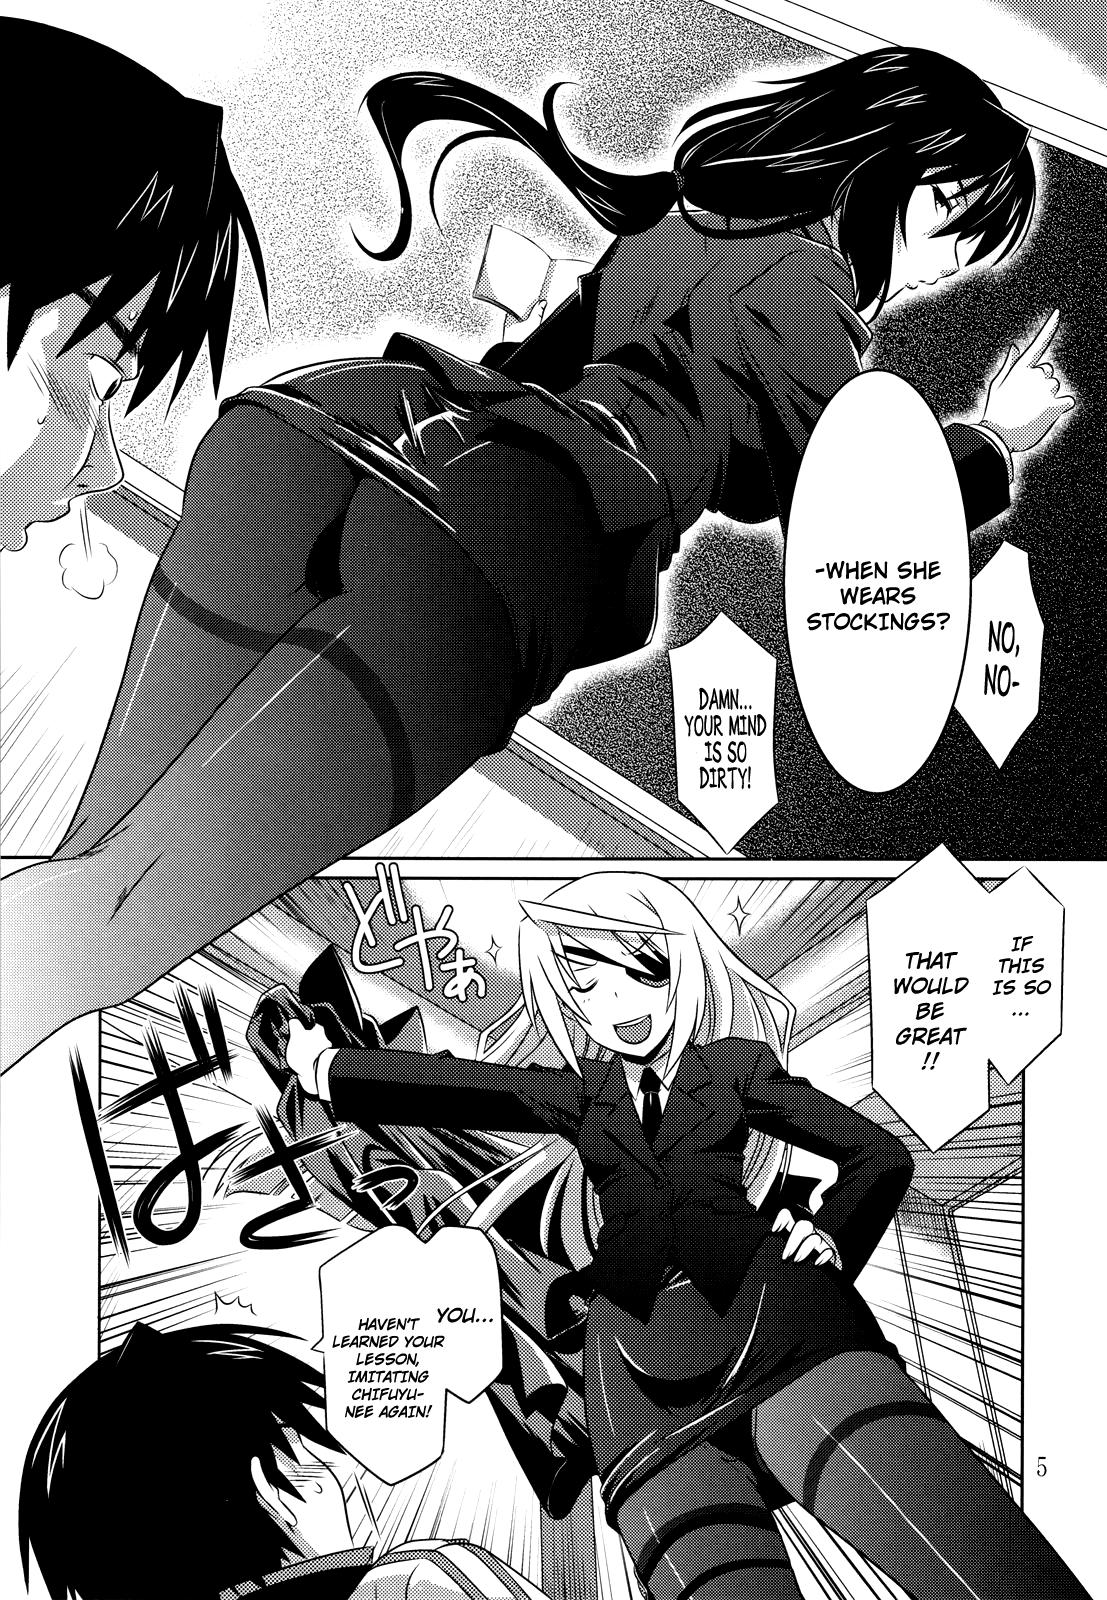 Sex Party is Incest Strategy 2 - Infinite stratos Teenager - Page 4